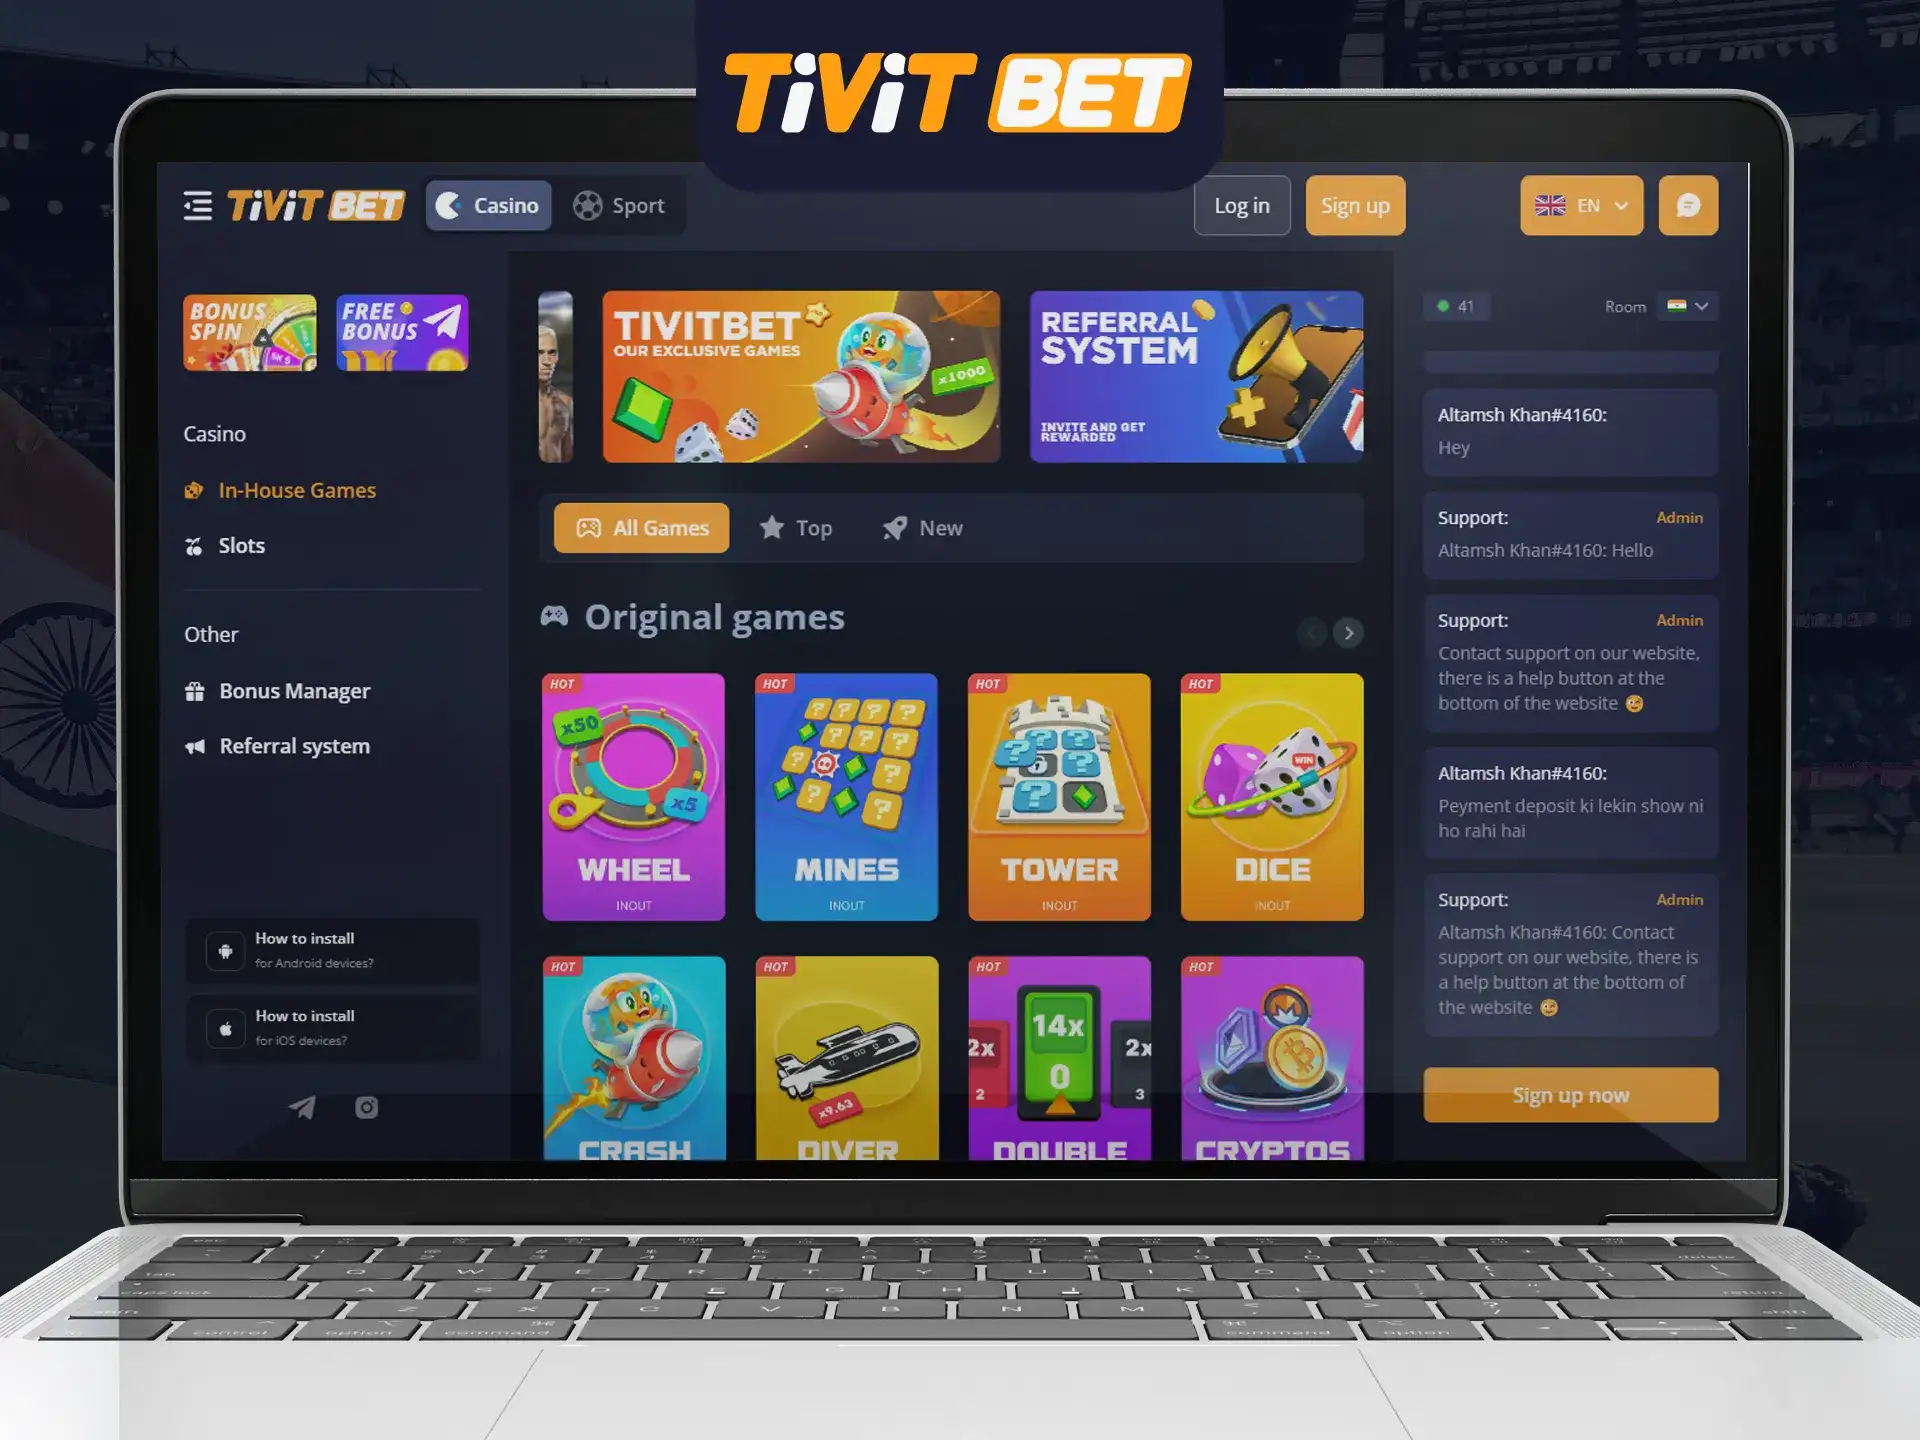 On the Tivit Bet website you will find sports betting, casino, bonuses and an affiliate program.